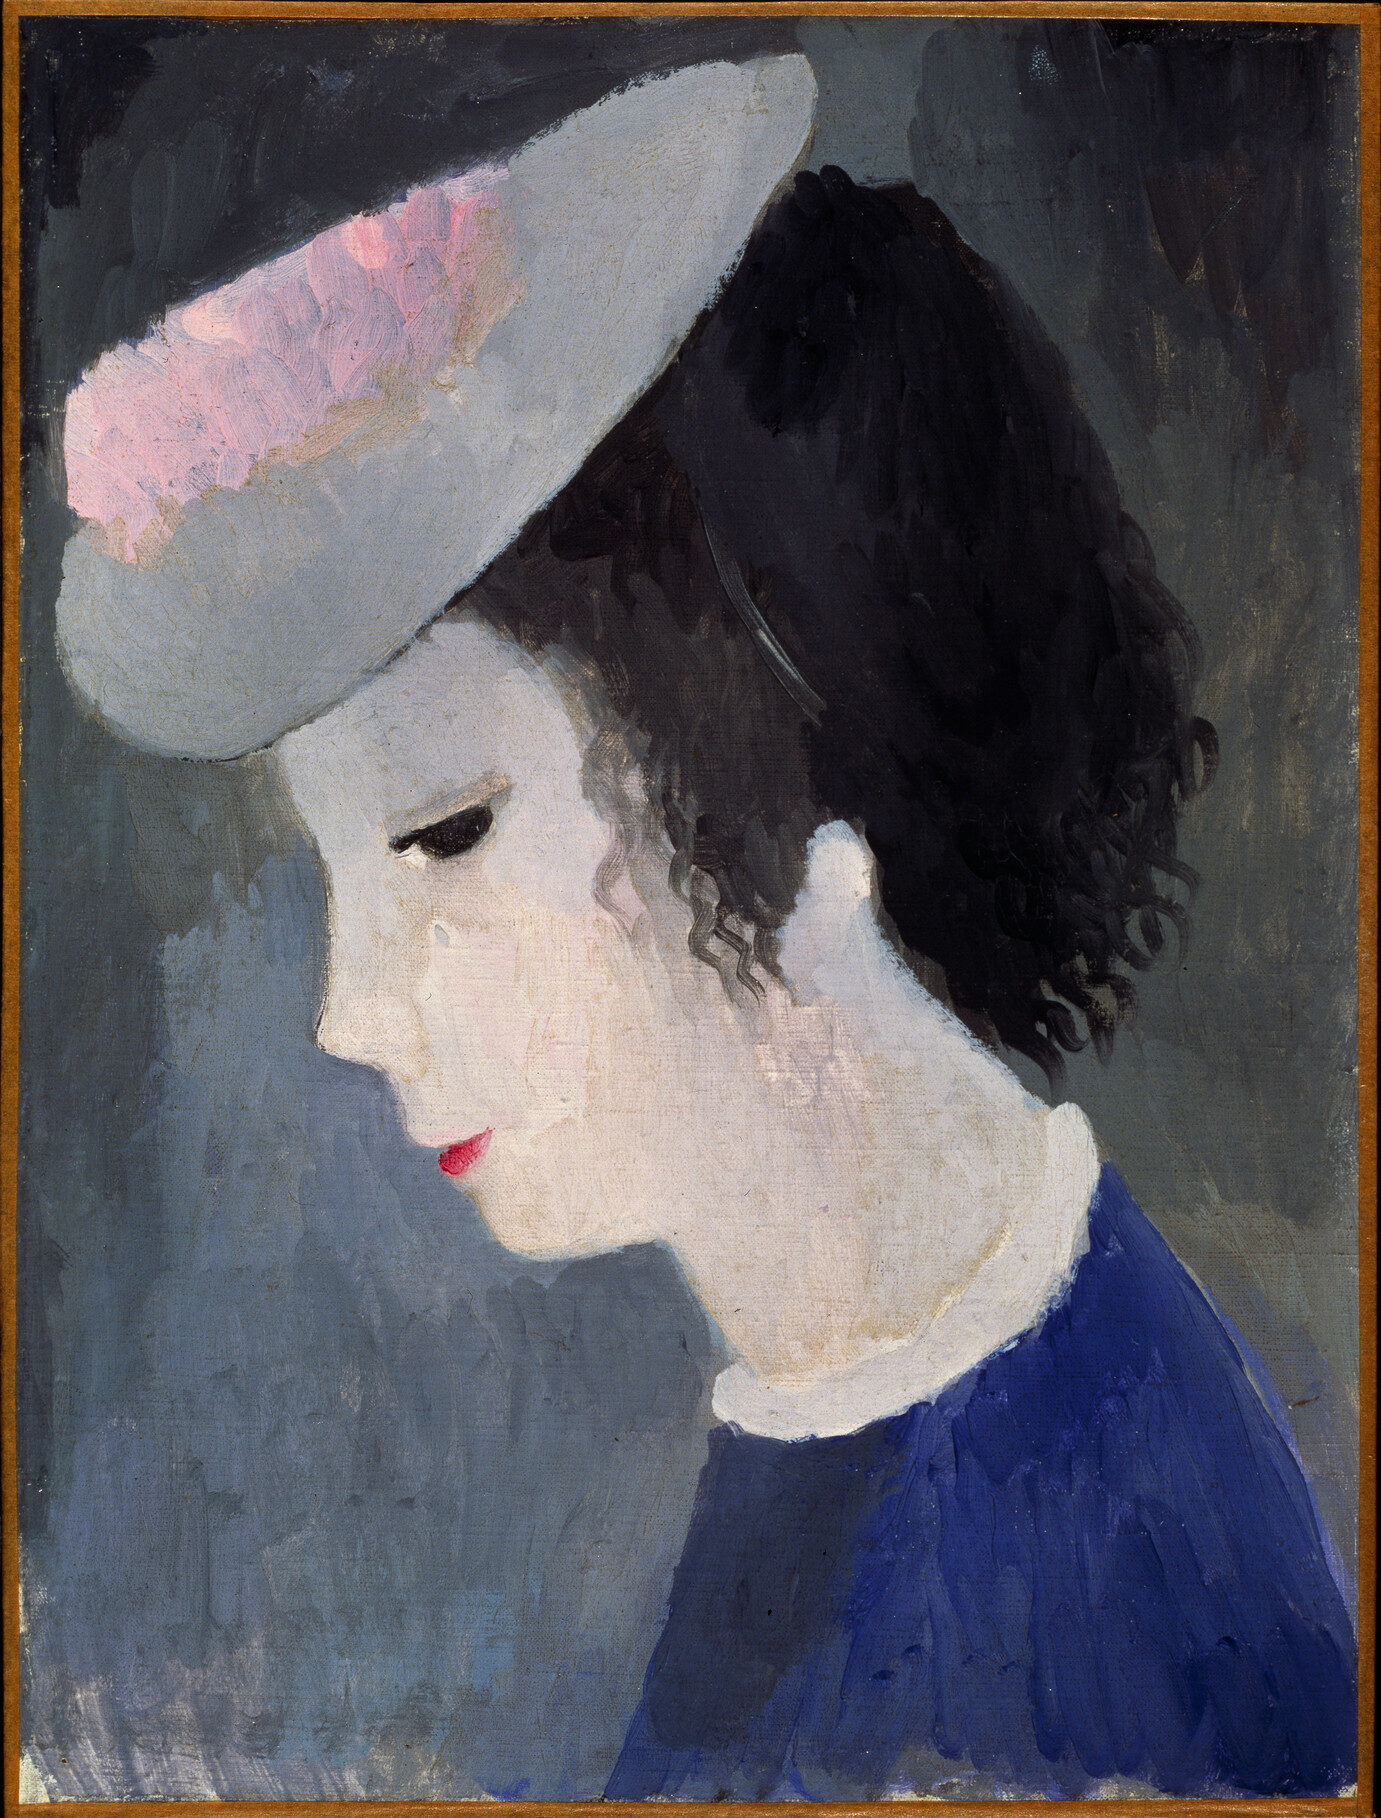 A portrait of a young girl in profile with her head tilted downwards and her eyes slightly closed. She wears a blue dress with a white collar, red lipstick, and a grey and pink hat. The dark background in combination with her facial expression evokes a melancholy feeling.